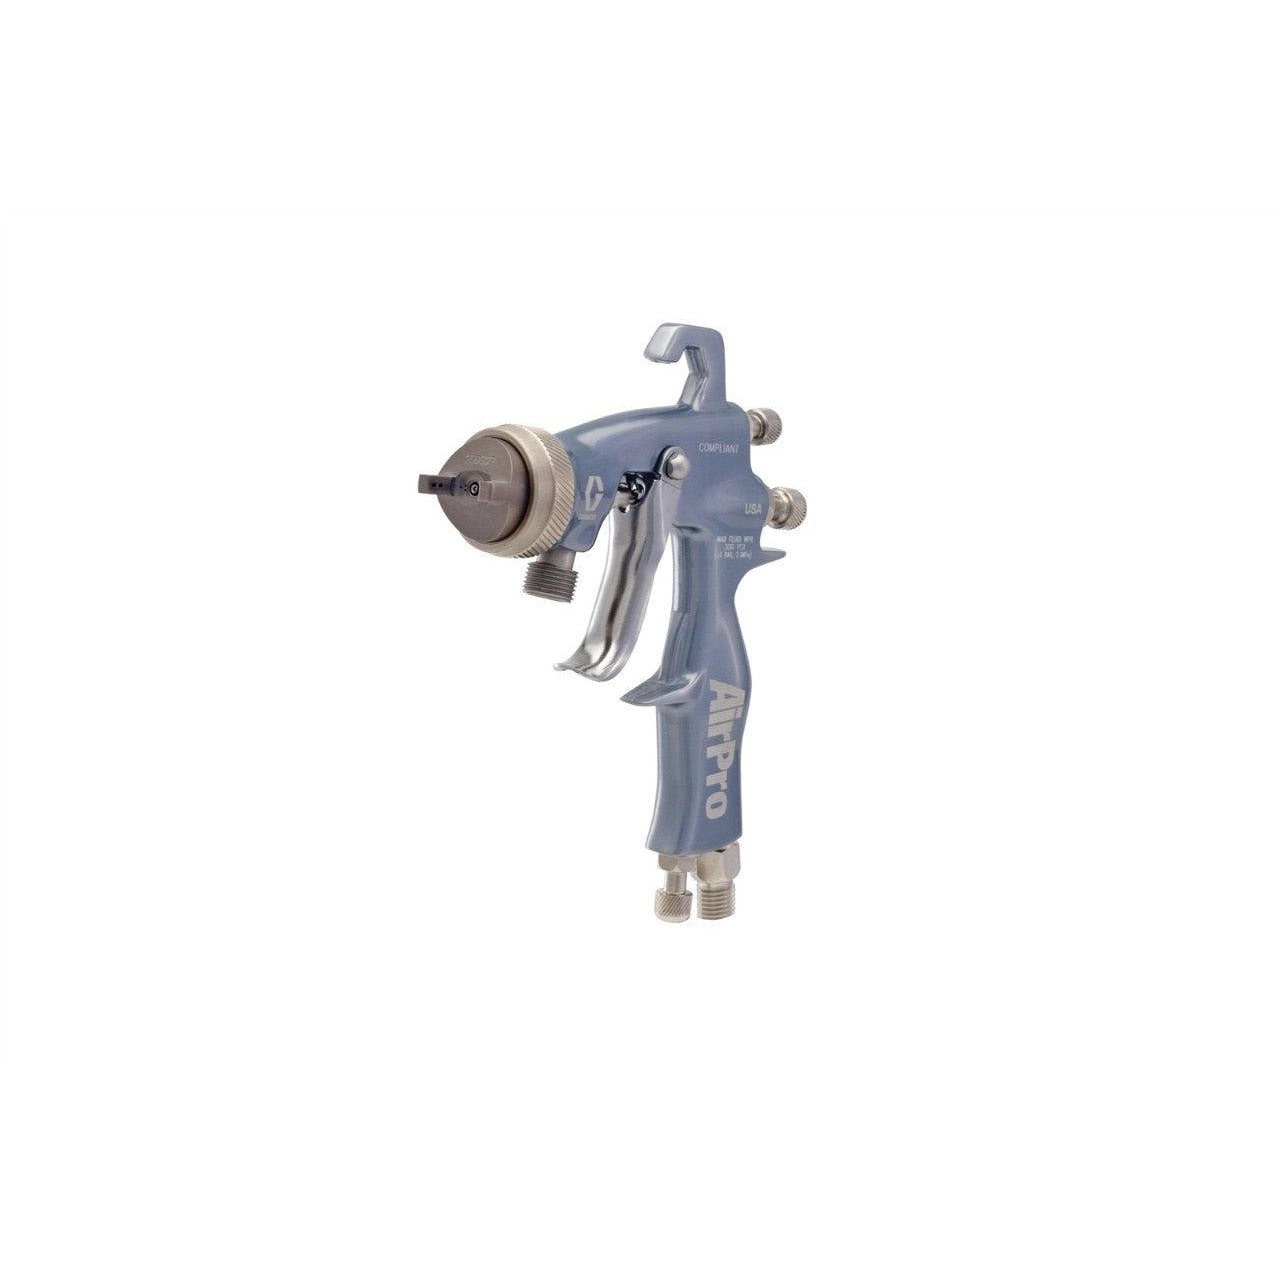 AirPro Air Spray Pressure Feed Gun, Compliant, 0.042 inch (1.1 mm) Nozzle, SST Tip, for General Metal Applications